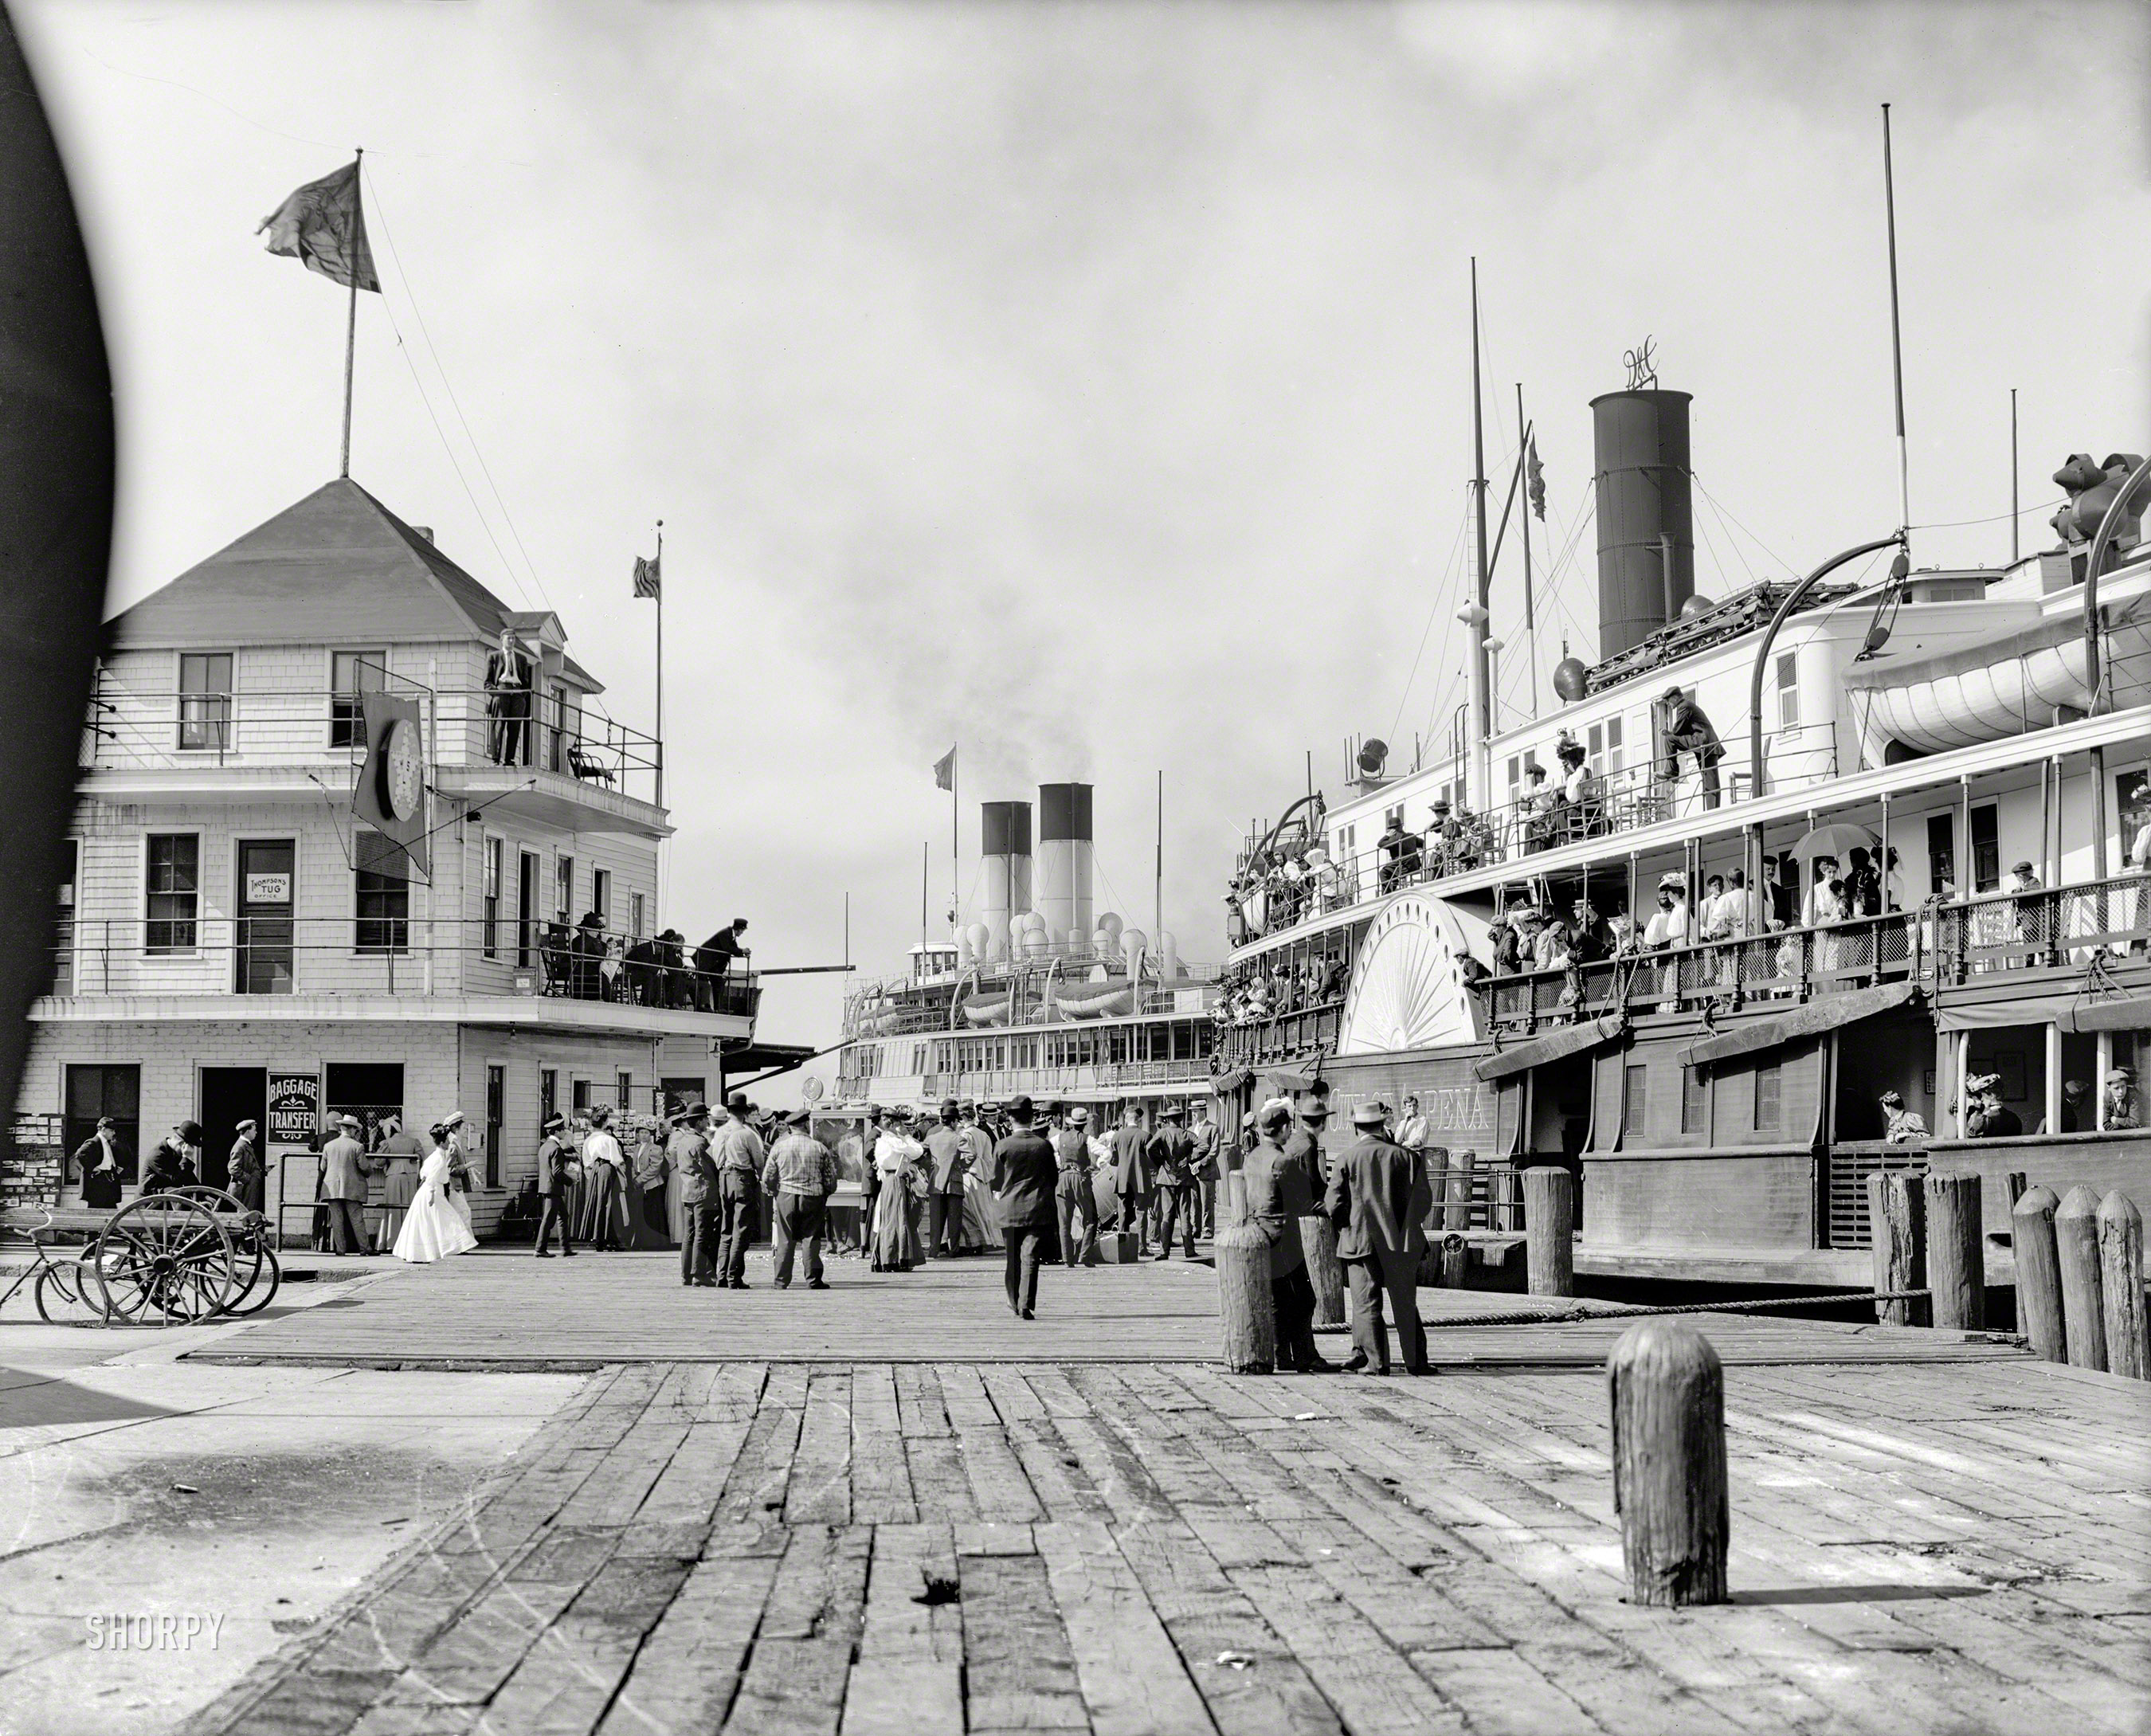 Port Huron, Michigan, circa 1908. "Steamers at pier." At right, the sidewheeler City of Alpena. 8x10 glass negative, Detroit Publishing Co. View full size.